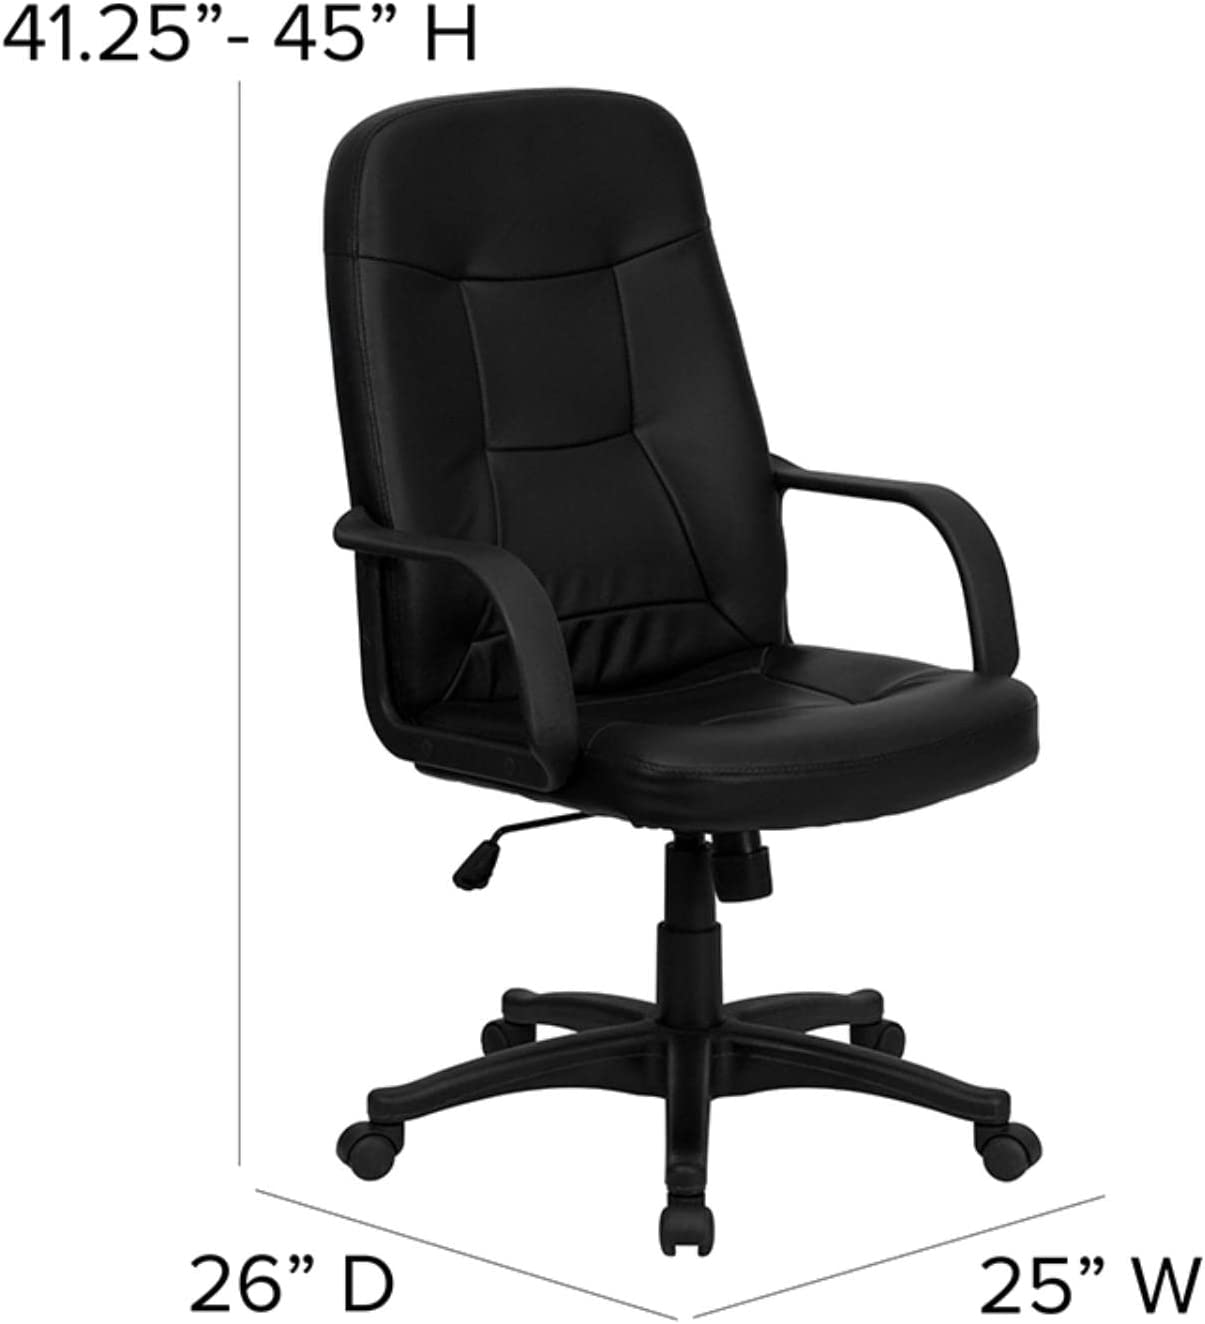 Flash Furniture High Back Black Glove Vinyl Executive Swivel Office Chair with Arms